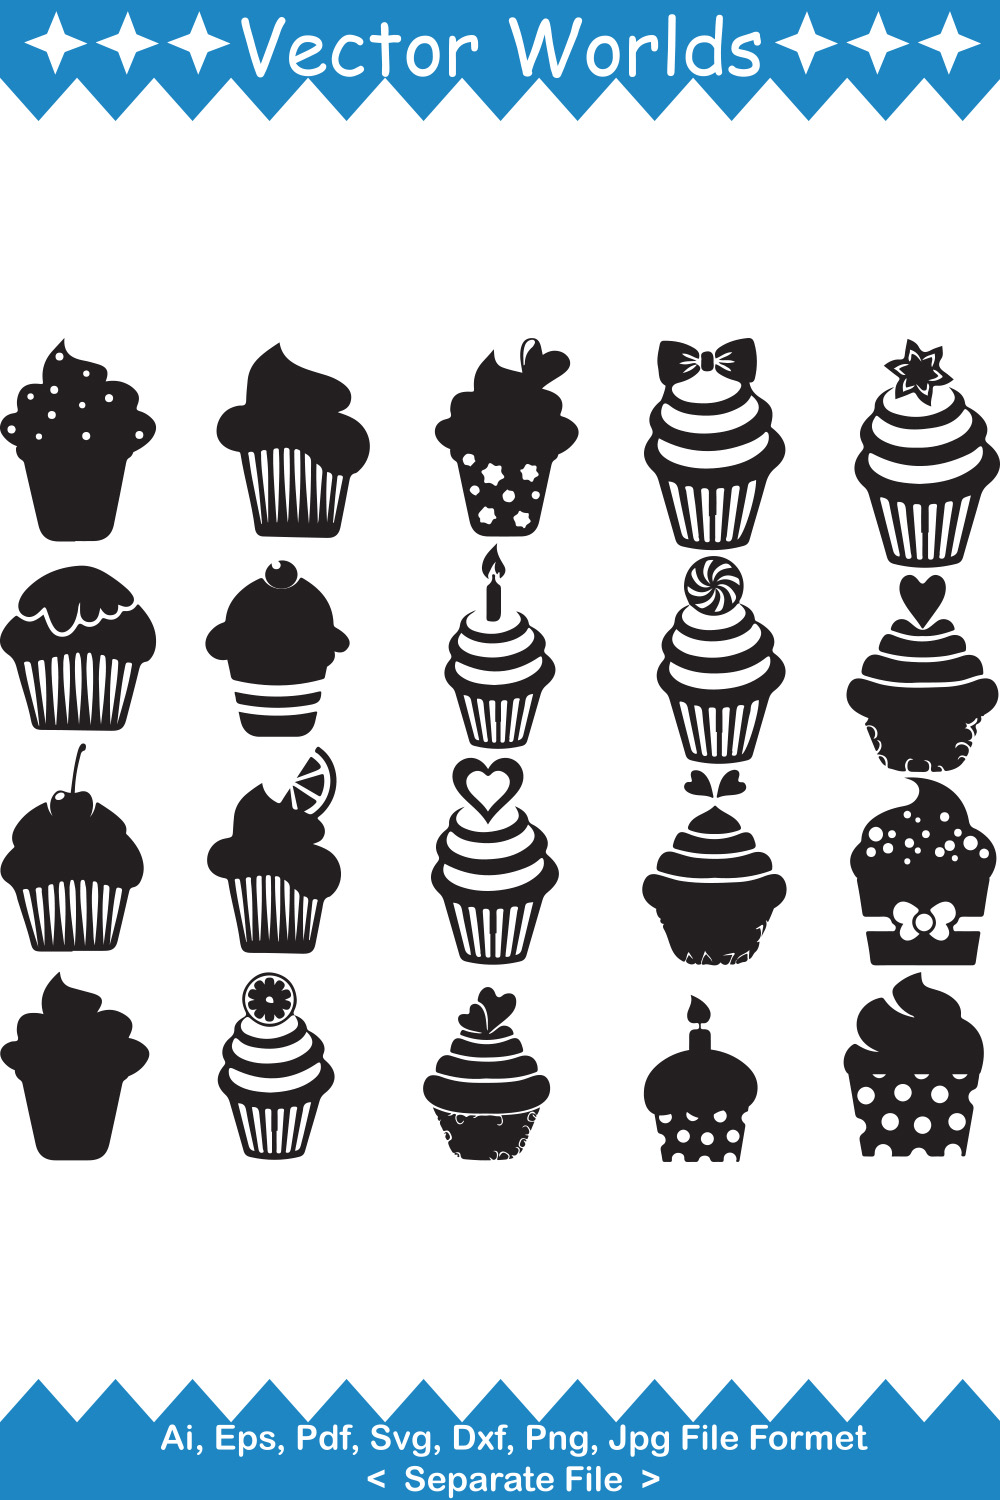 A selection of adorable cupcakes silhouette images